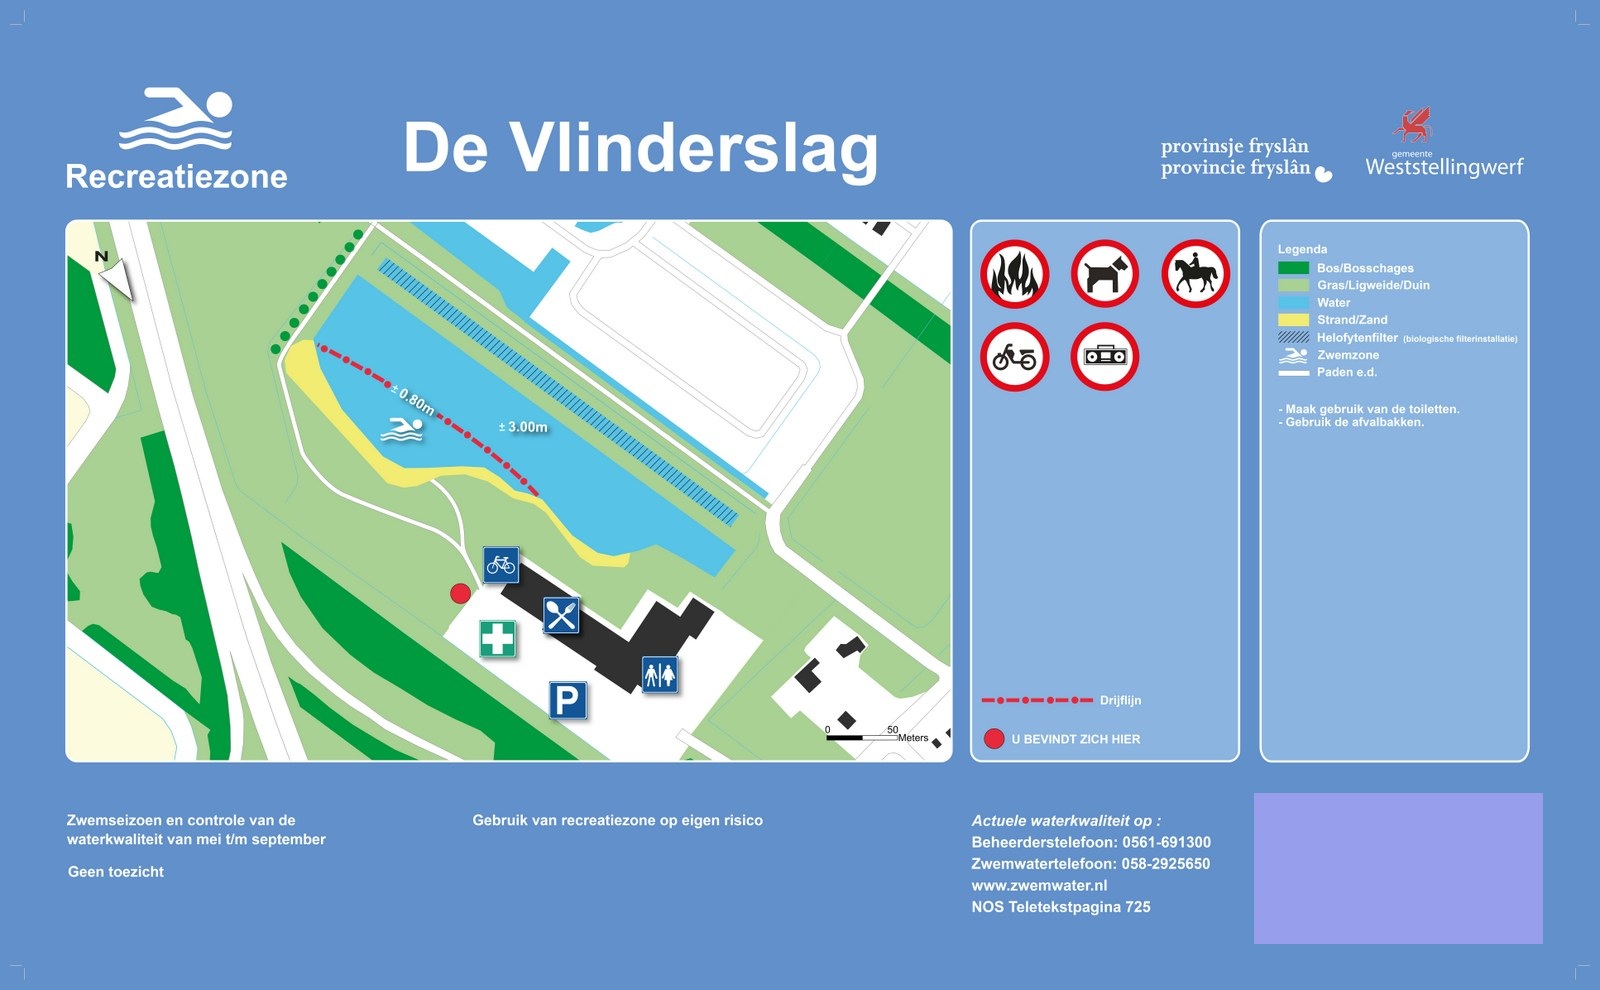 The information board at the swimming location De Vlinderslag